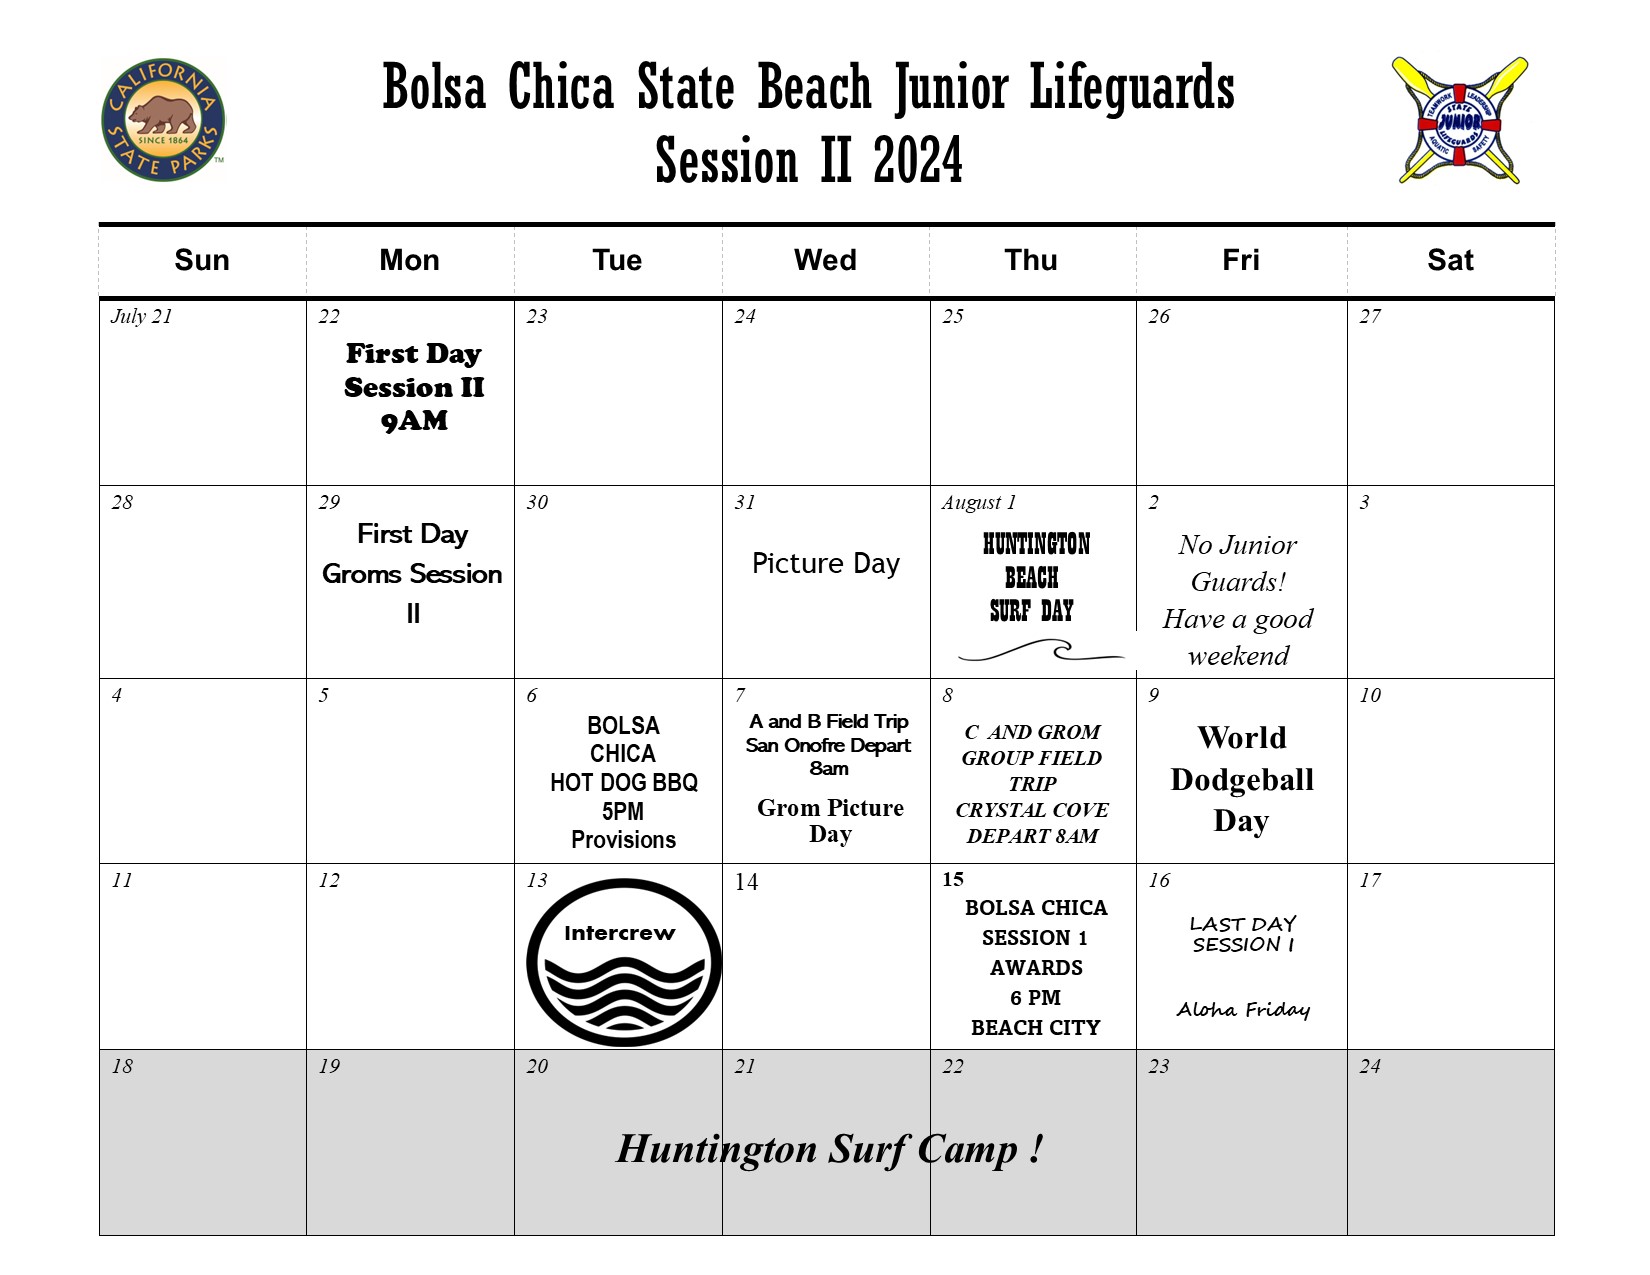 Bolsa Chica State Beach Junior Lifeguards Session II 2024. The California state parks logo and California State Junior Lifeguard program logos on the top. Monday July 22 First Day Groms Session II. July 31 Picture Day. August 1 Huntington Beach Surf Day. August 2 No Junior Guards! Have a good weekend. August 6 Bolsa CHica Hot Dog BBQ 5PM Provisions. August 7 A and B Field Trip San Onofre Depart 8am. Grom Picture Day. August 8 C and Grom Group Field Trip Crystal Cove Depart 8am. August 9 World Dogeball Day. August 13 Intercrew. August 15 Bolsa Chica Session I Awards 6pm Beach City. August 16 Last Day Session I Aloha Friday. Week of August 18 - 24 greyed out with the text 